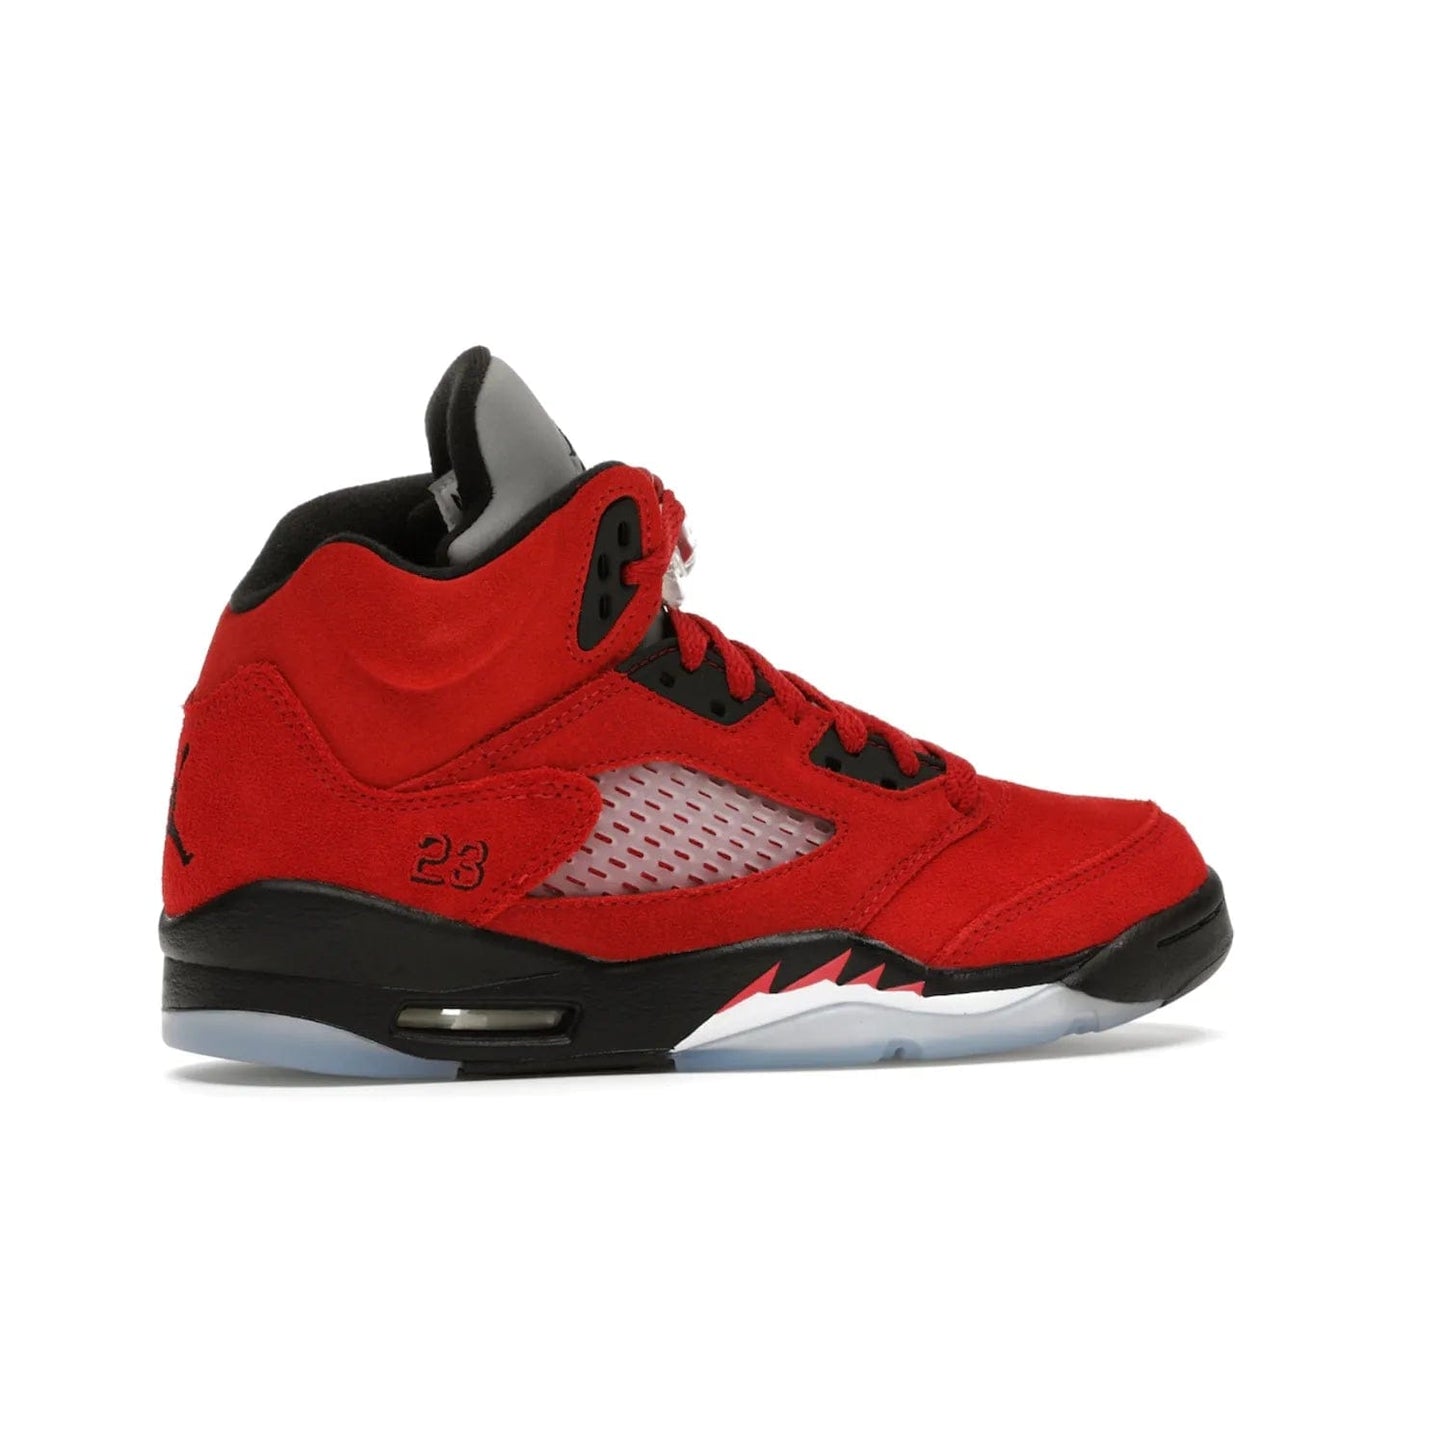 Jordan 5 Retro Raging Bull Red (2021) (GS) - Image 35 - Only at www.BallersClubKickz.com - Jordan 5 Retro Raging Bulls Red 2021 GS. Varsity Red suede upper with embroidered number 23, black leather detail, red laces, and midsole with air cushioning. Jumpman logos on tongue, heel, and outsole. On-trend streetwear and basketball style. Released April 10, 2021.